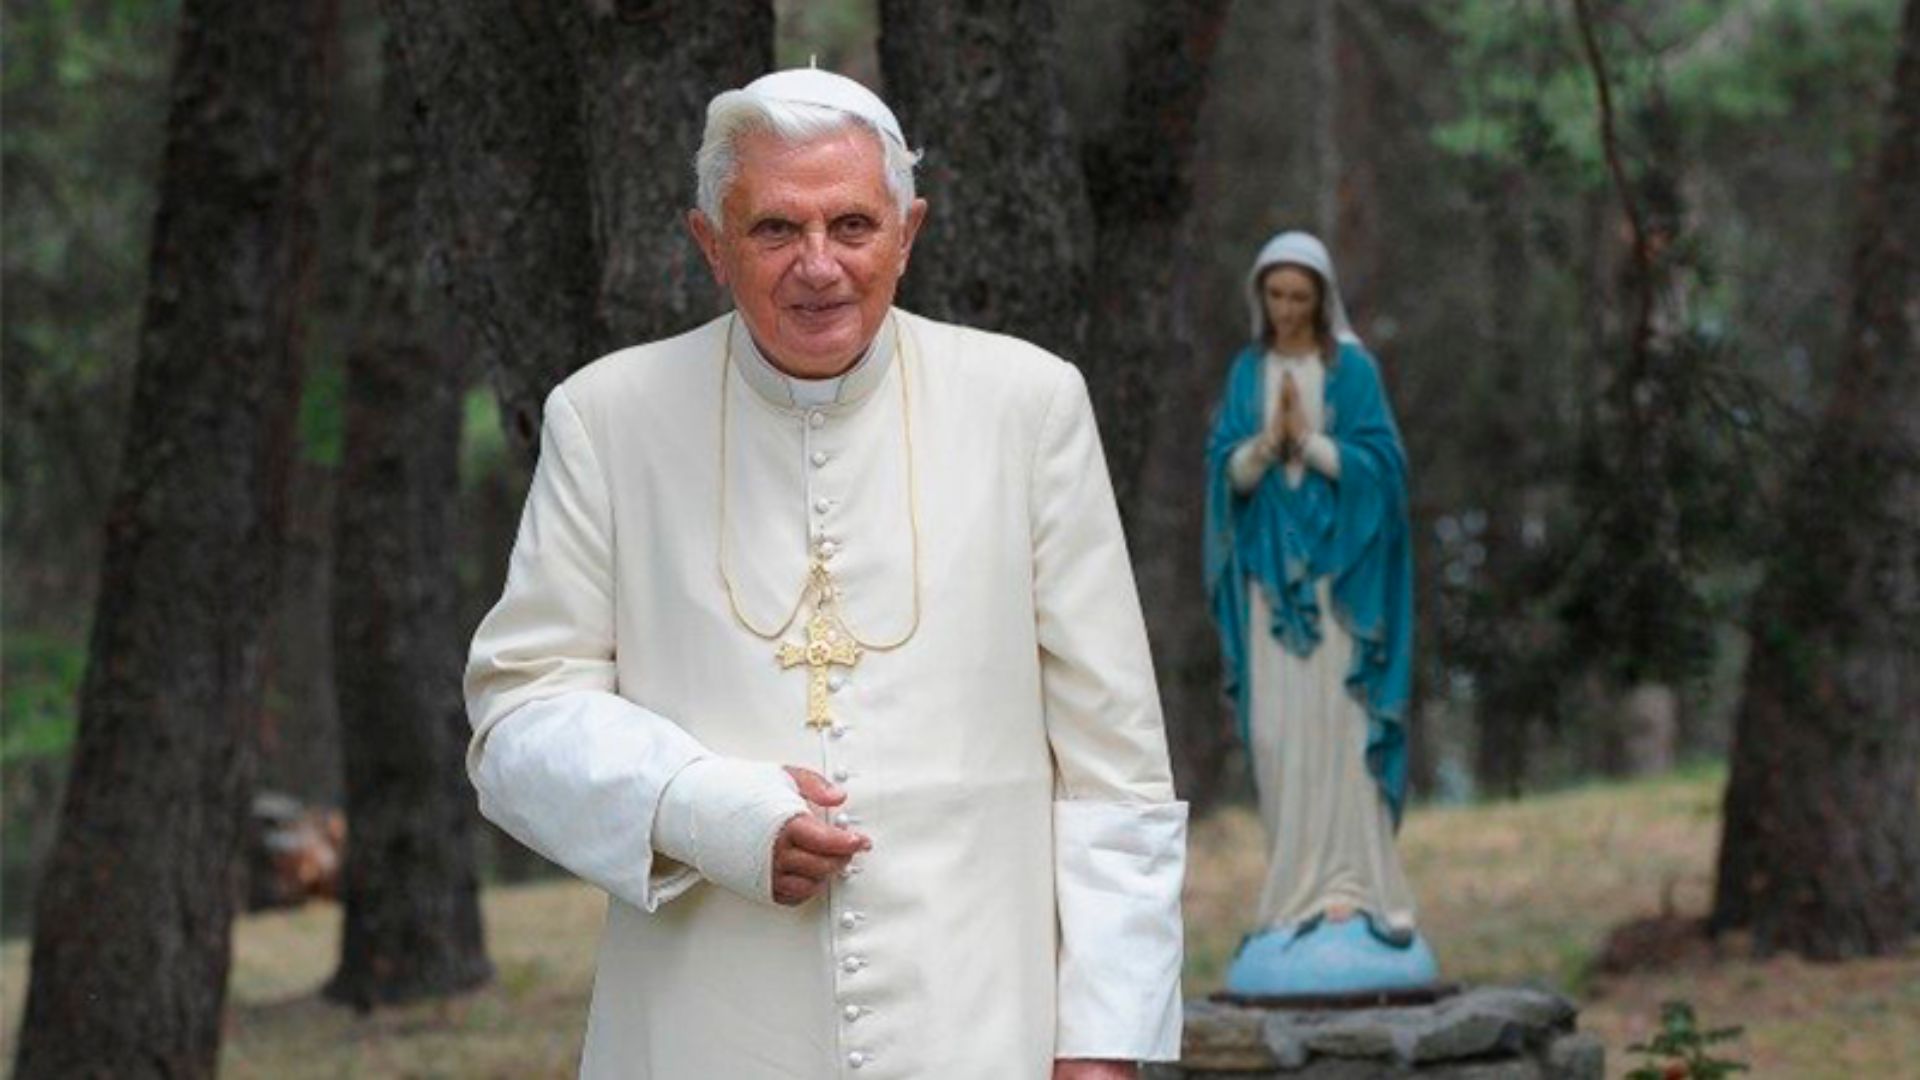 Costa Rica decrees four days of national mourning for the death of Benedict XVI